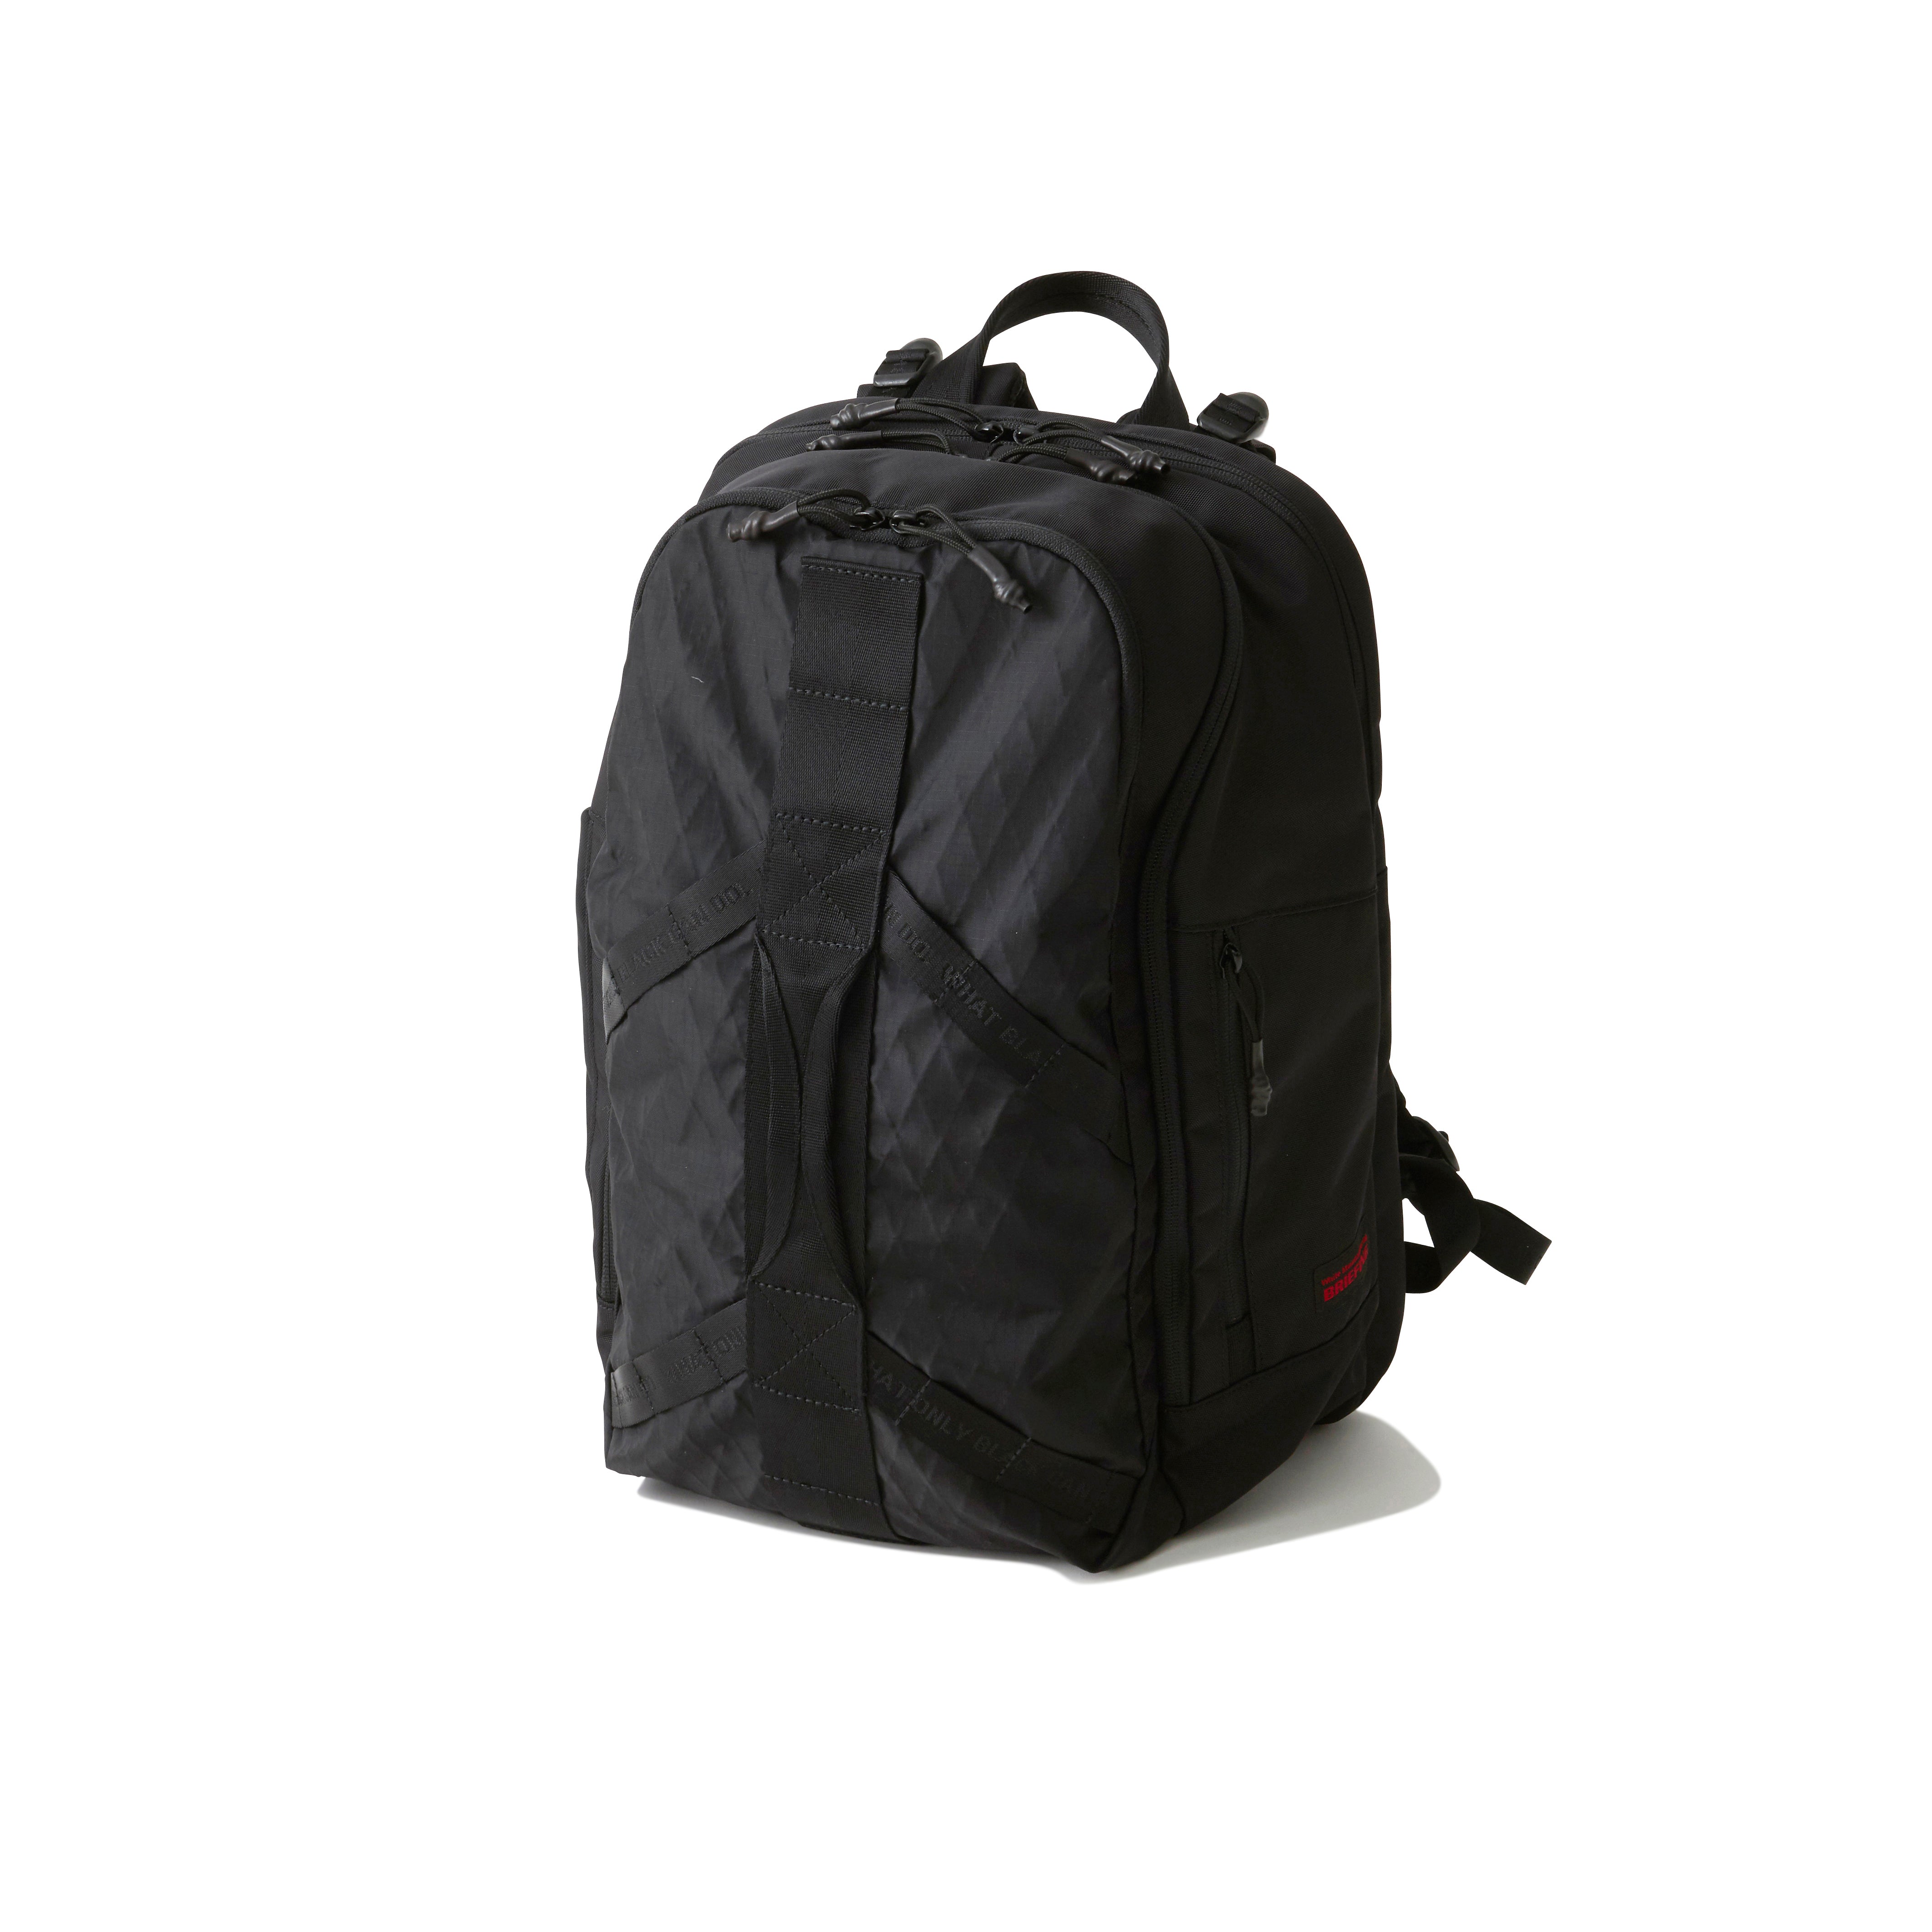 WM × BRIEFING BACK PACK – White Mountaineering OFFICIAL WEB SITE.